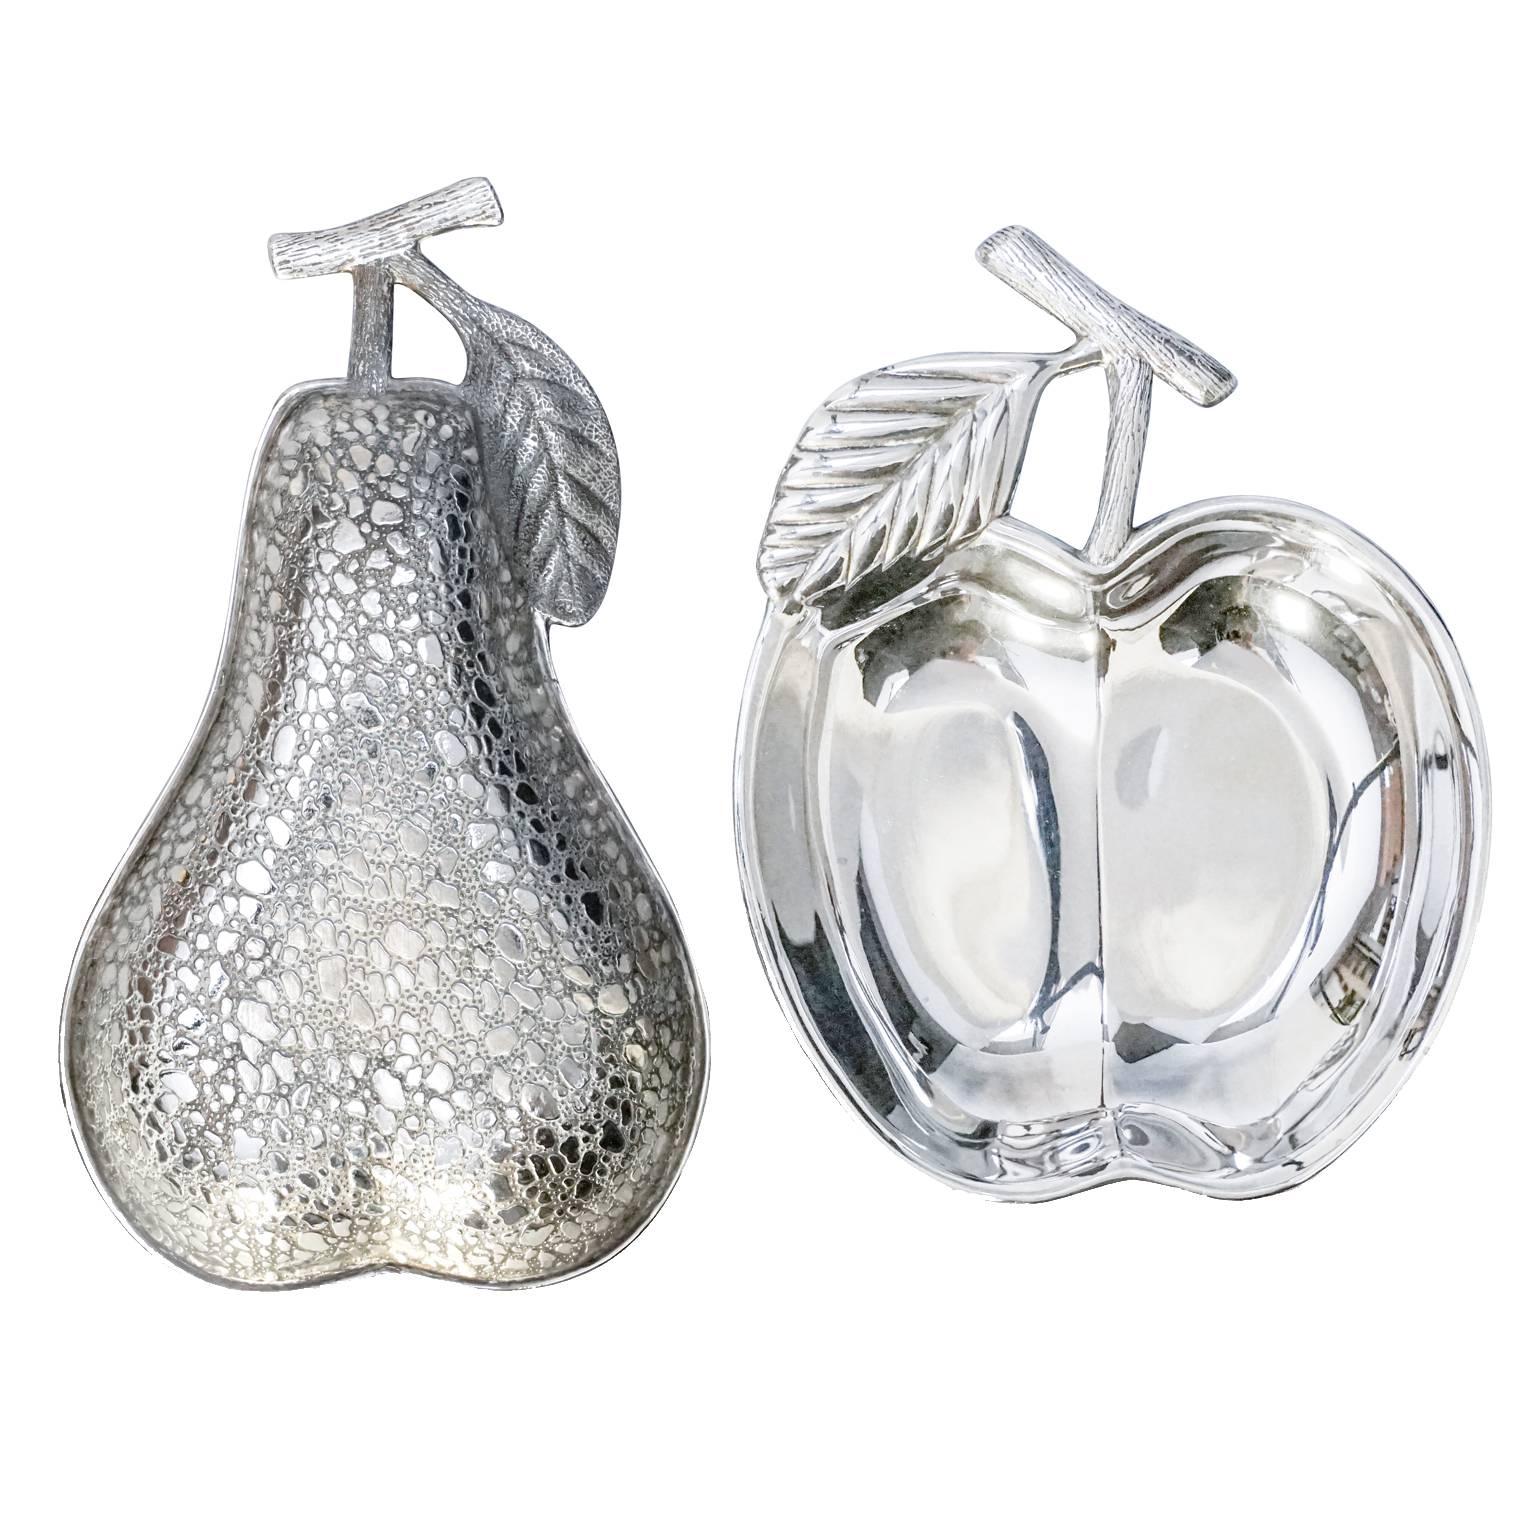 Set of Silvered Pear and Apple Trinket Bowls